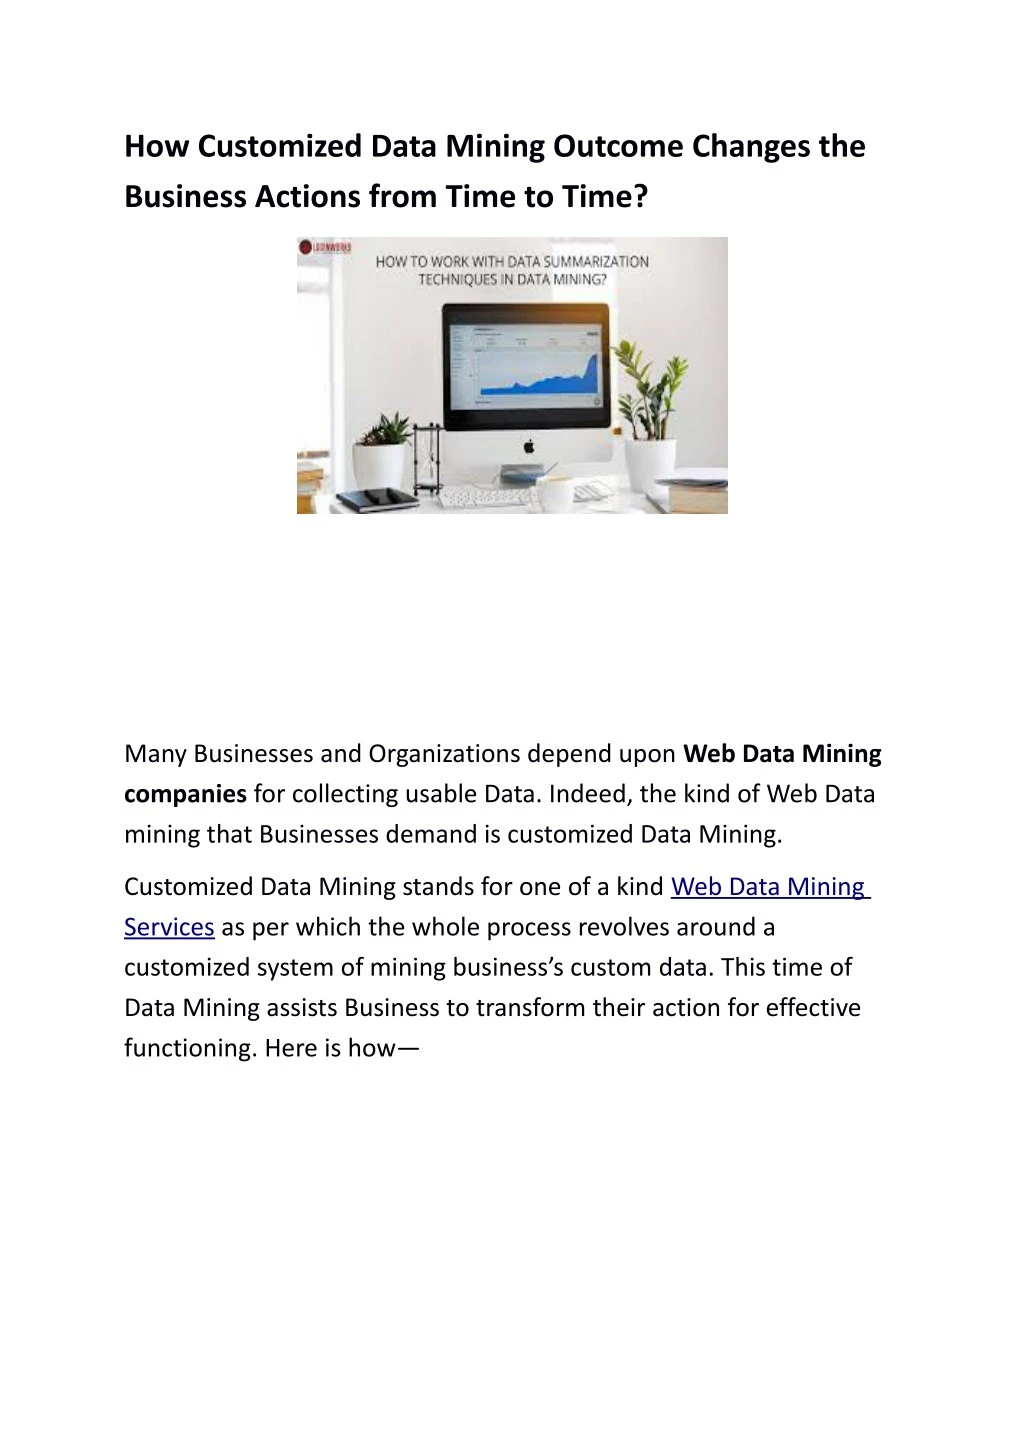 how customized data mining outcome changes